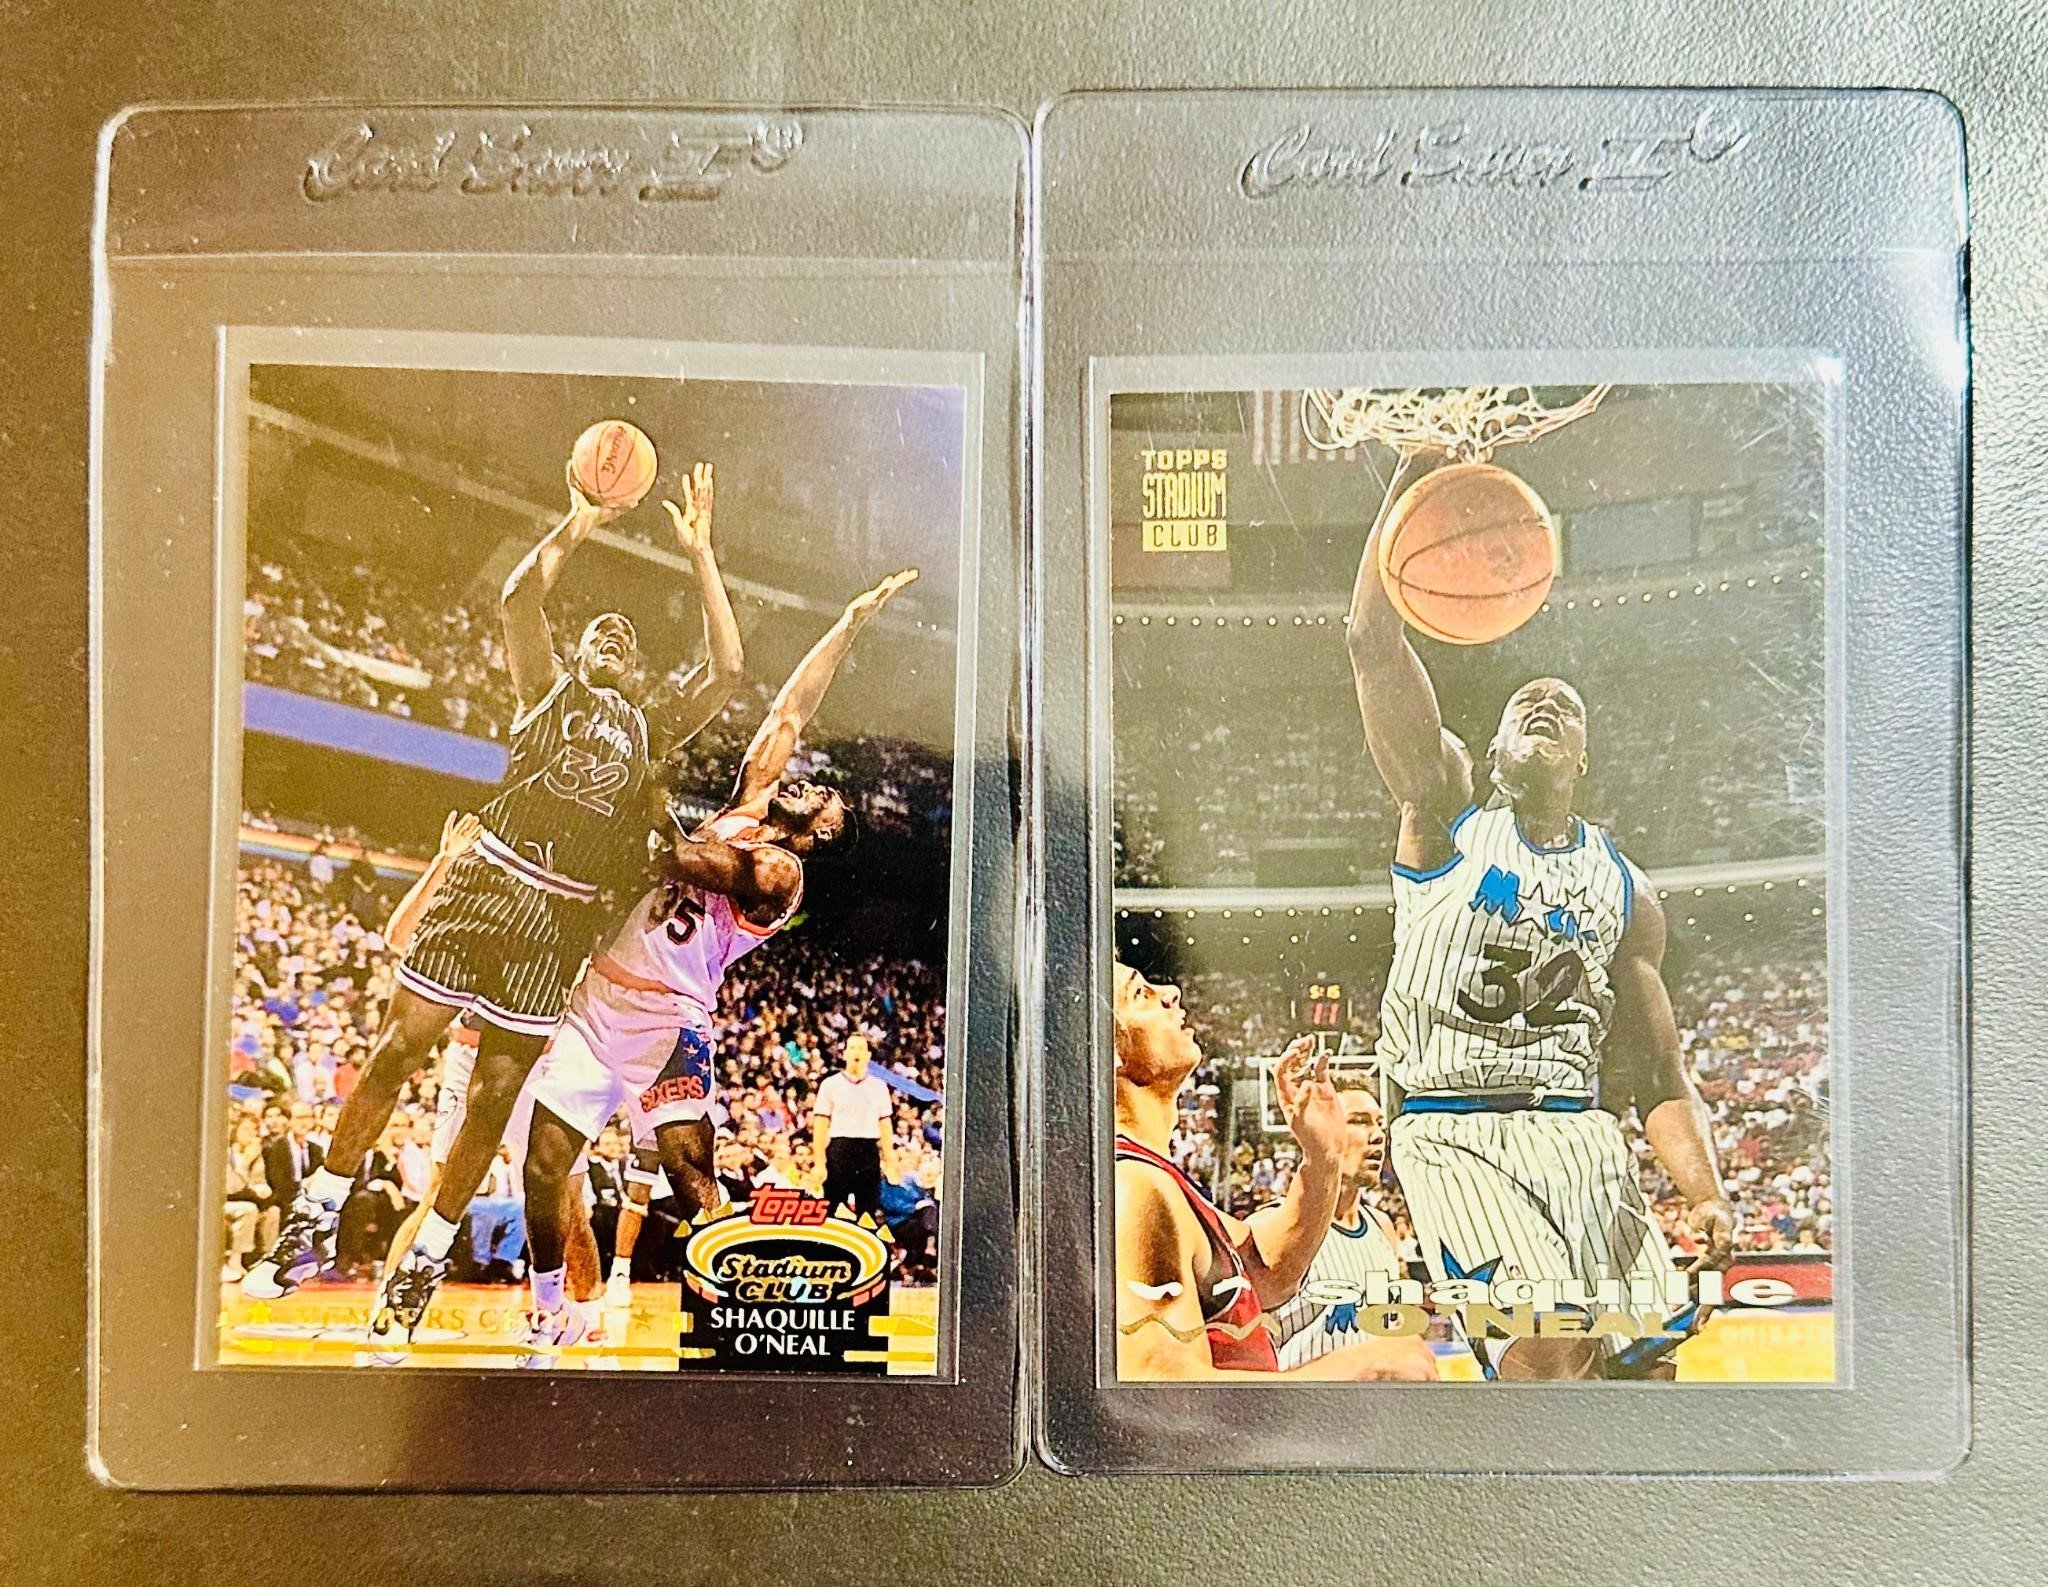 1993 Topps #201 & #100 Shaquille O’Neal rookie